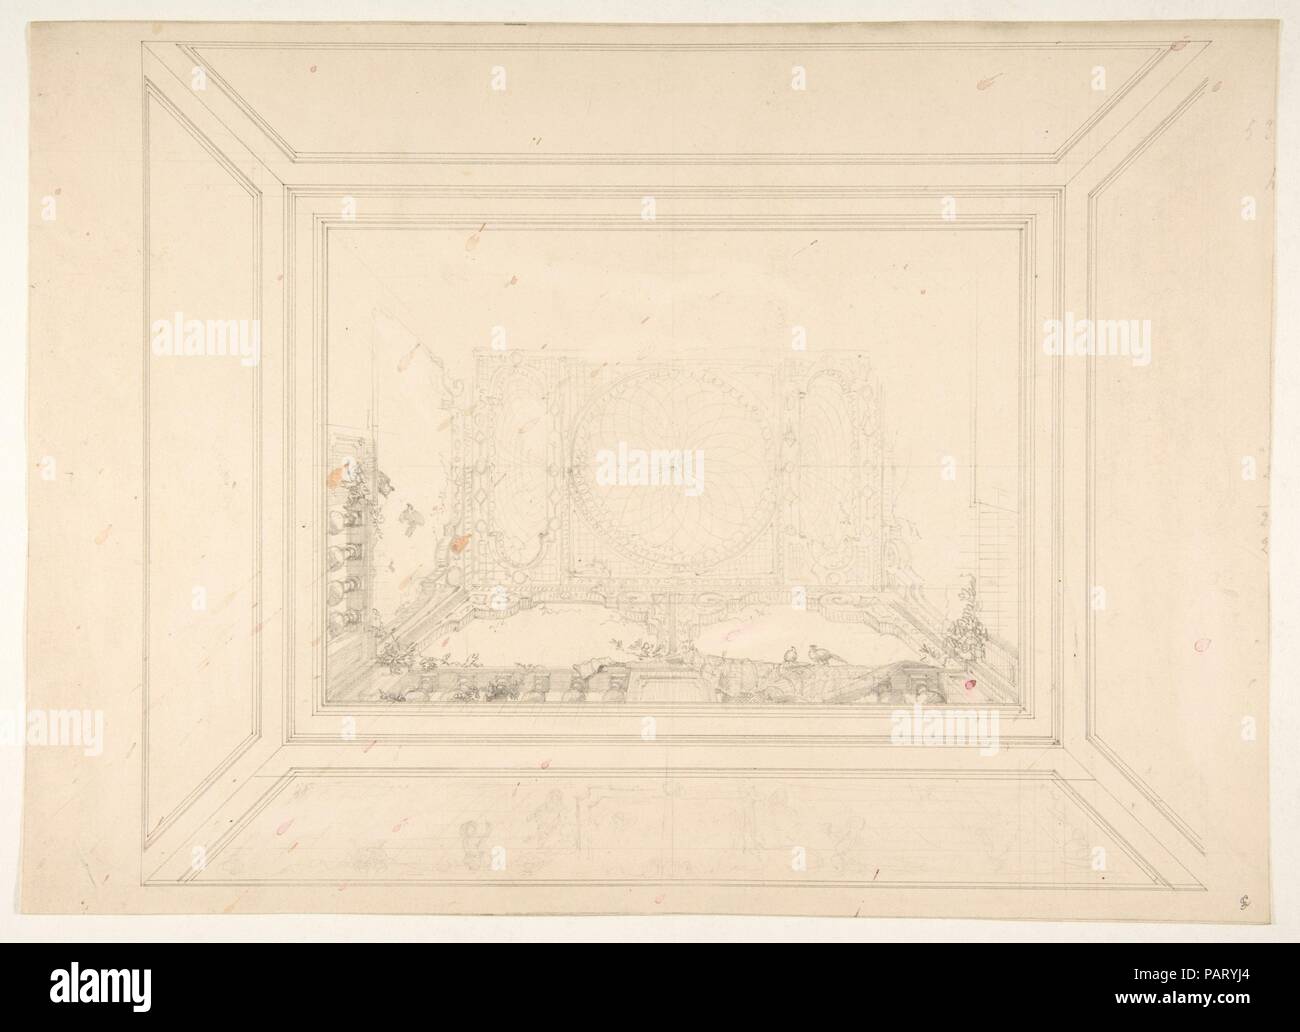 Design for a ceiling decorated with trellis work and a trompe l'oeil balustrade. Artist: Jules-Edmond-Charles Lachaise (French, died 1897); Eugène-Pierre Gourdet (French, born Paris, 1820-1889). Date: second half 19th century. Museum: Metropolitan Museum of Art, New York, USA. Stock Photo